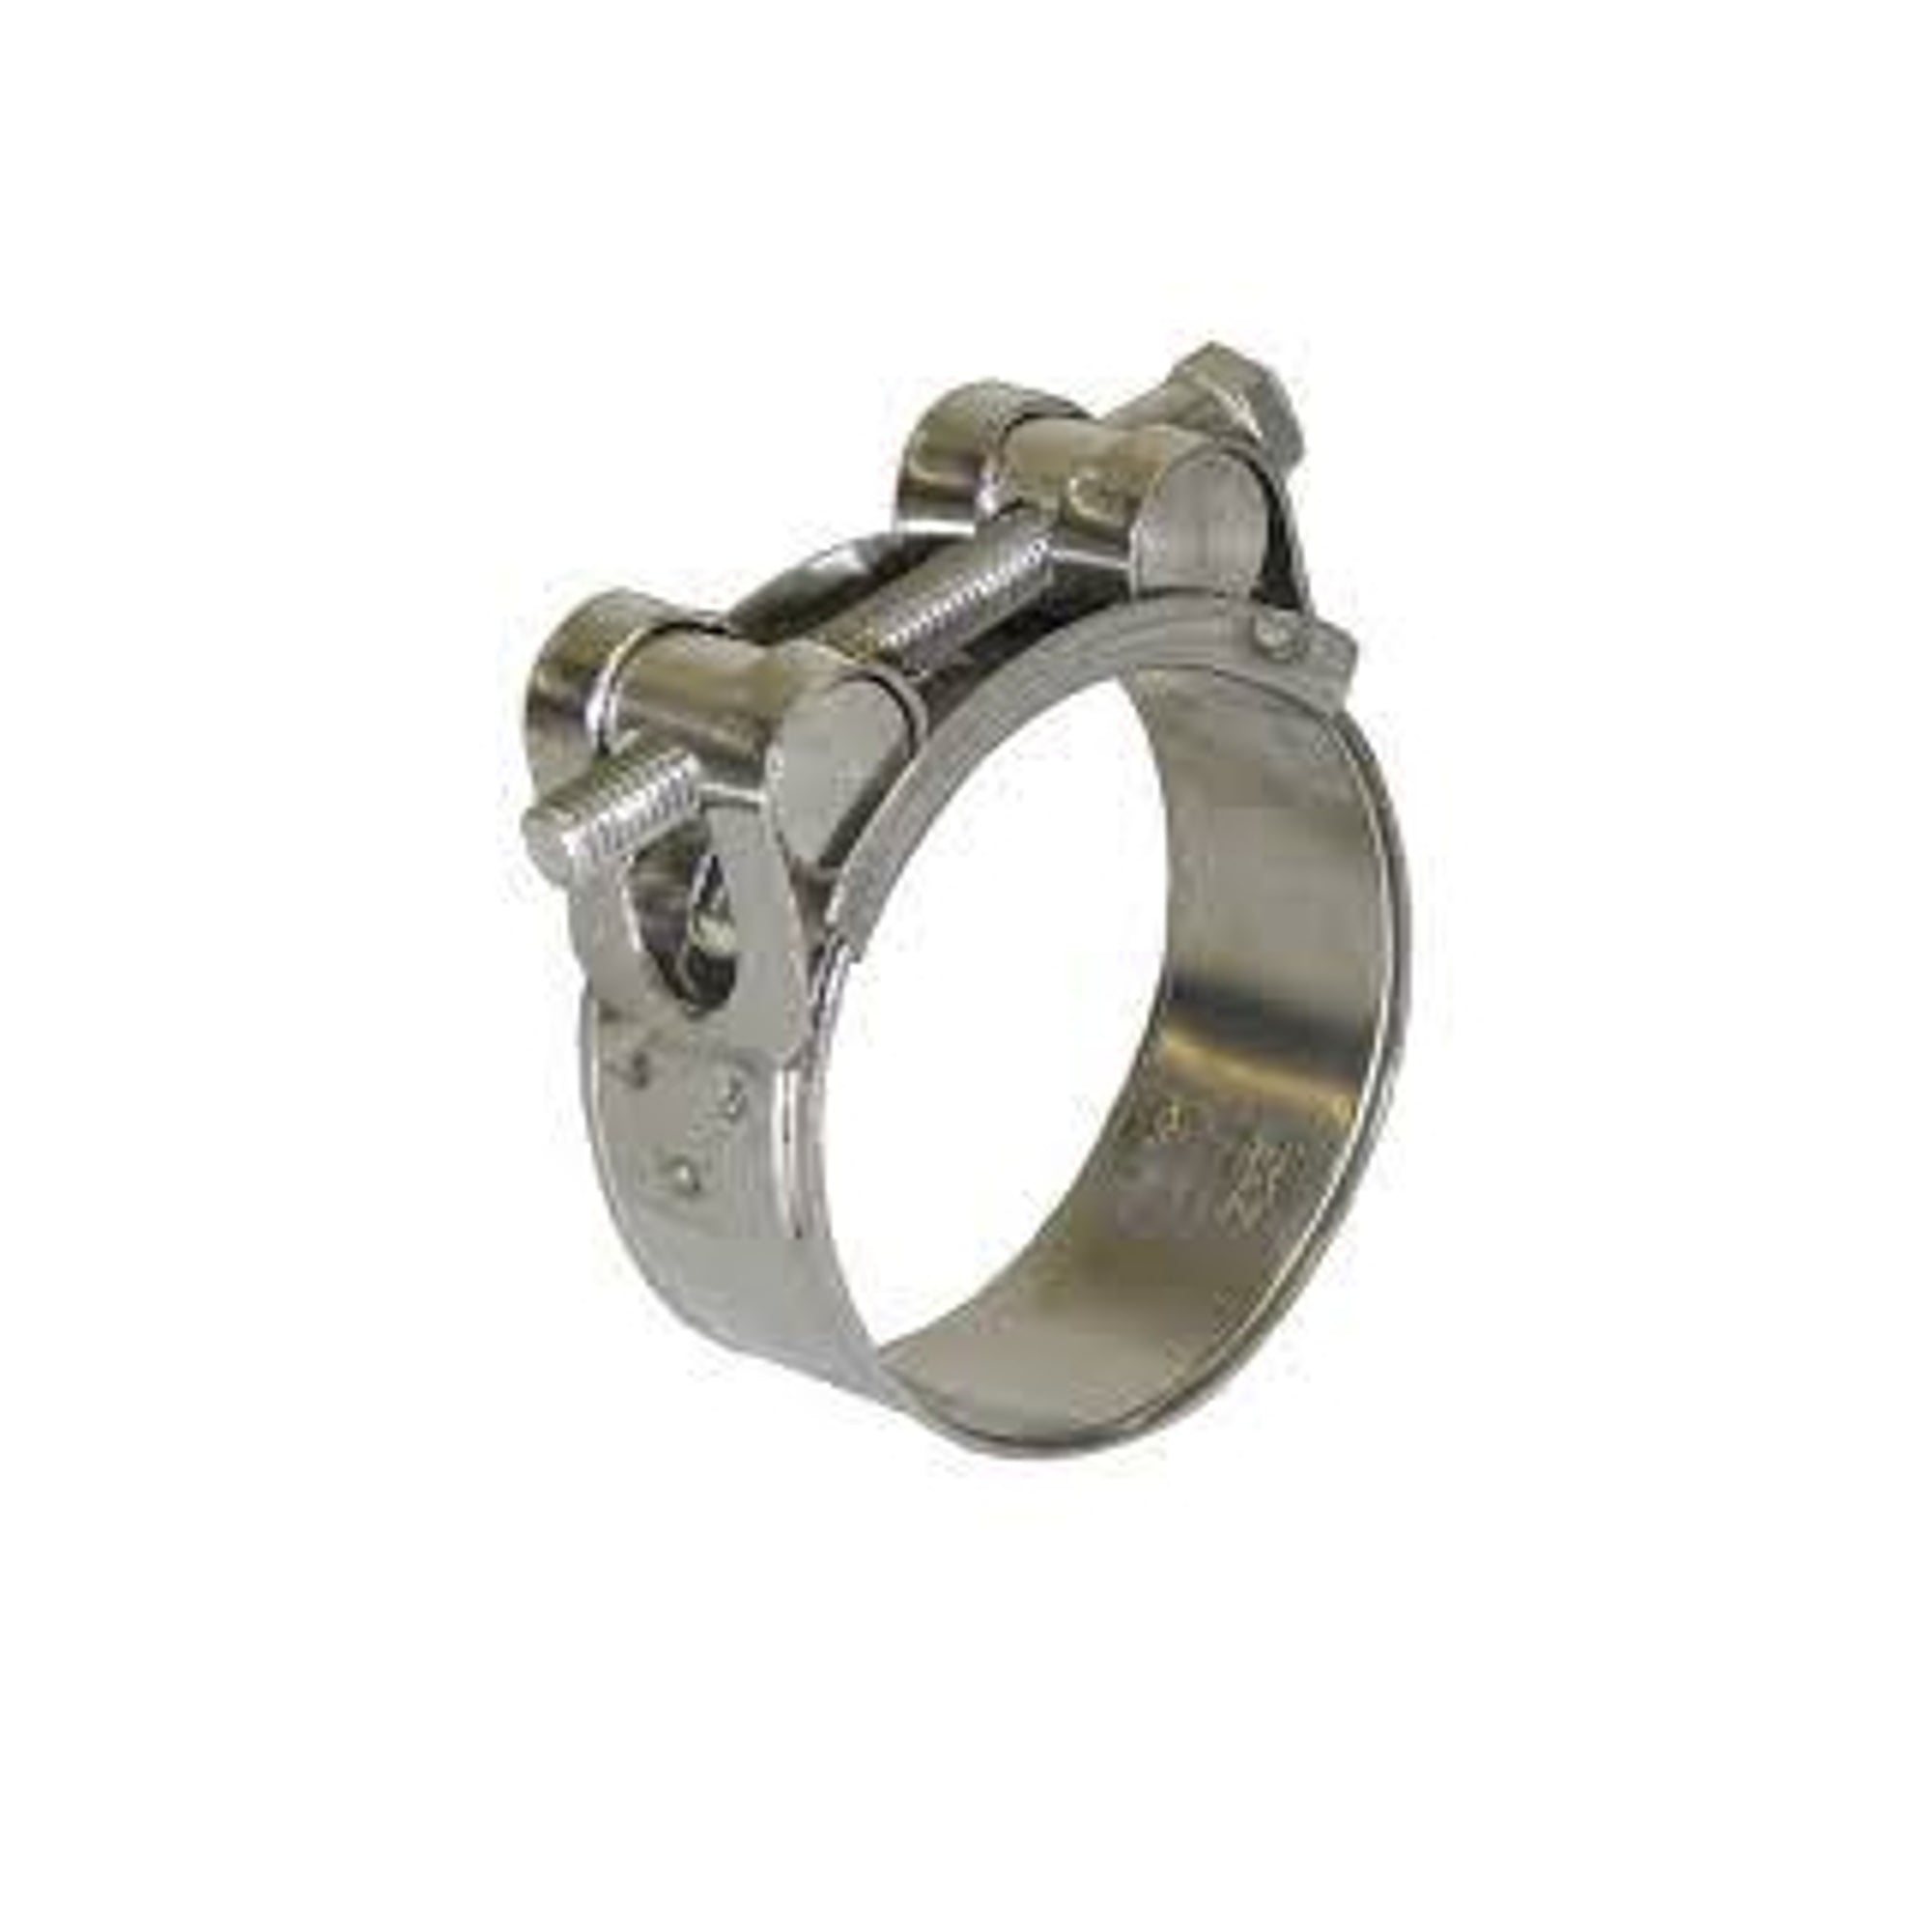 super clamp high pressure hose clamp tee bolted design